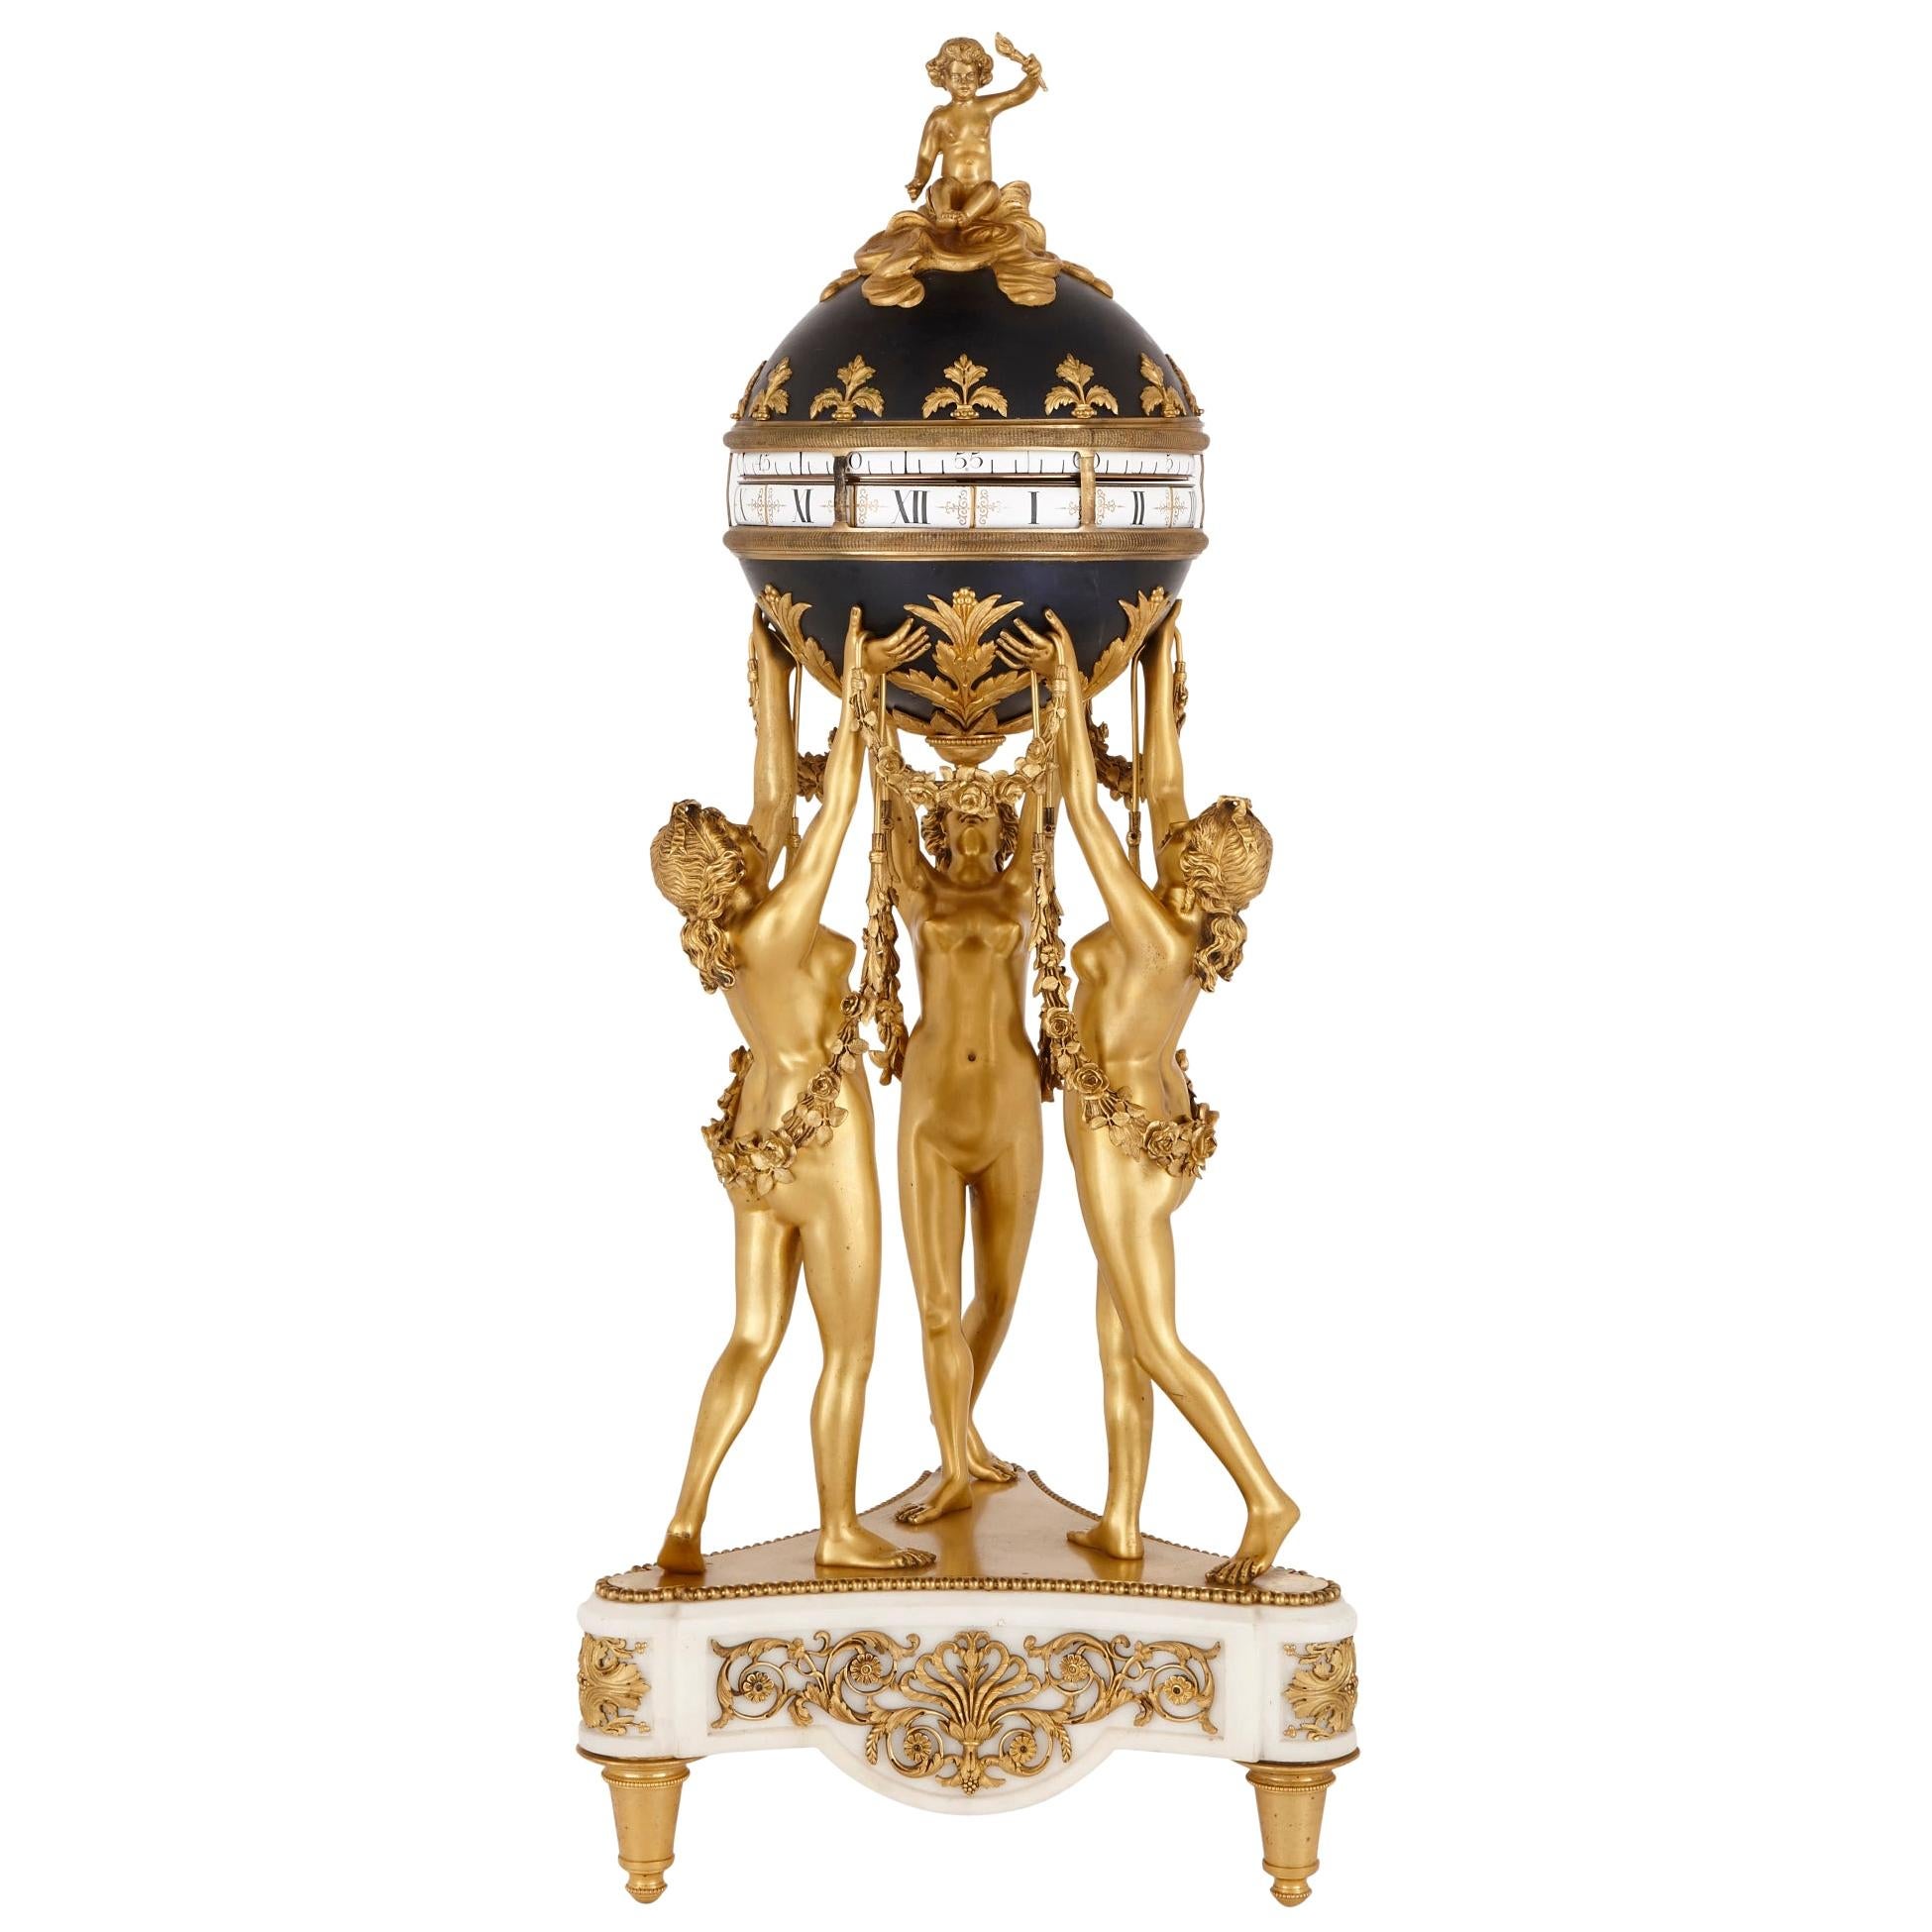 Ormolu, White Marble and Tole Cercle Tournant Mantel Clock by Lepaute For Sale